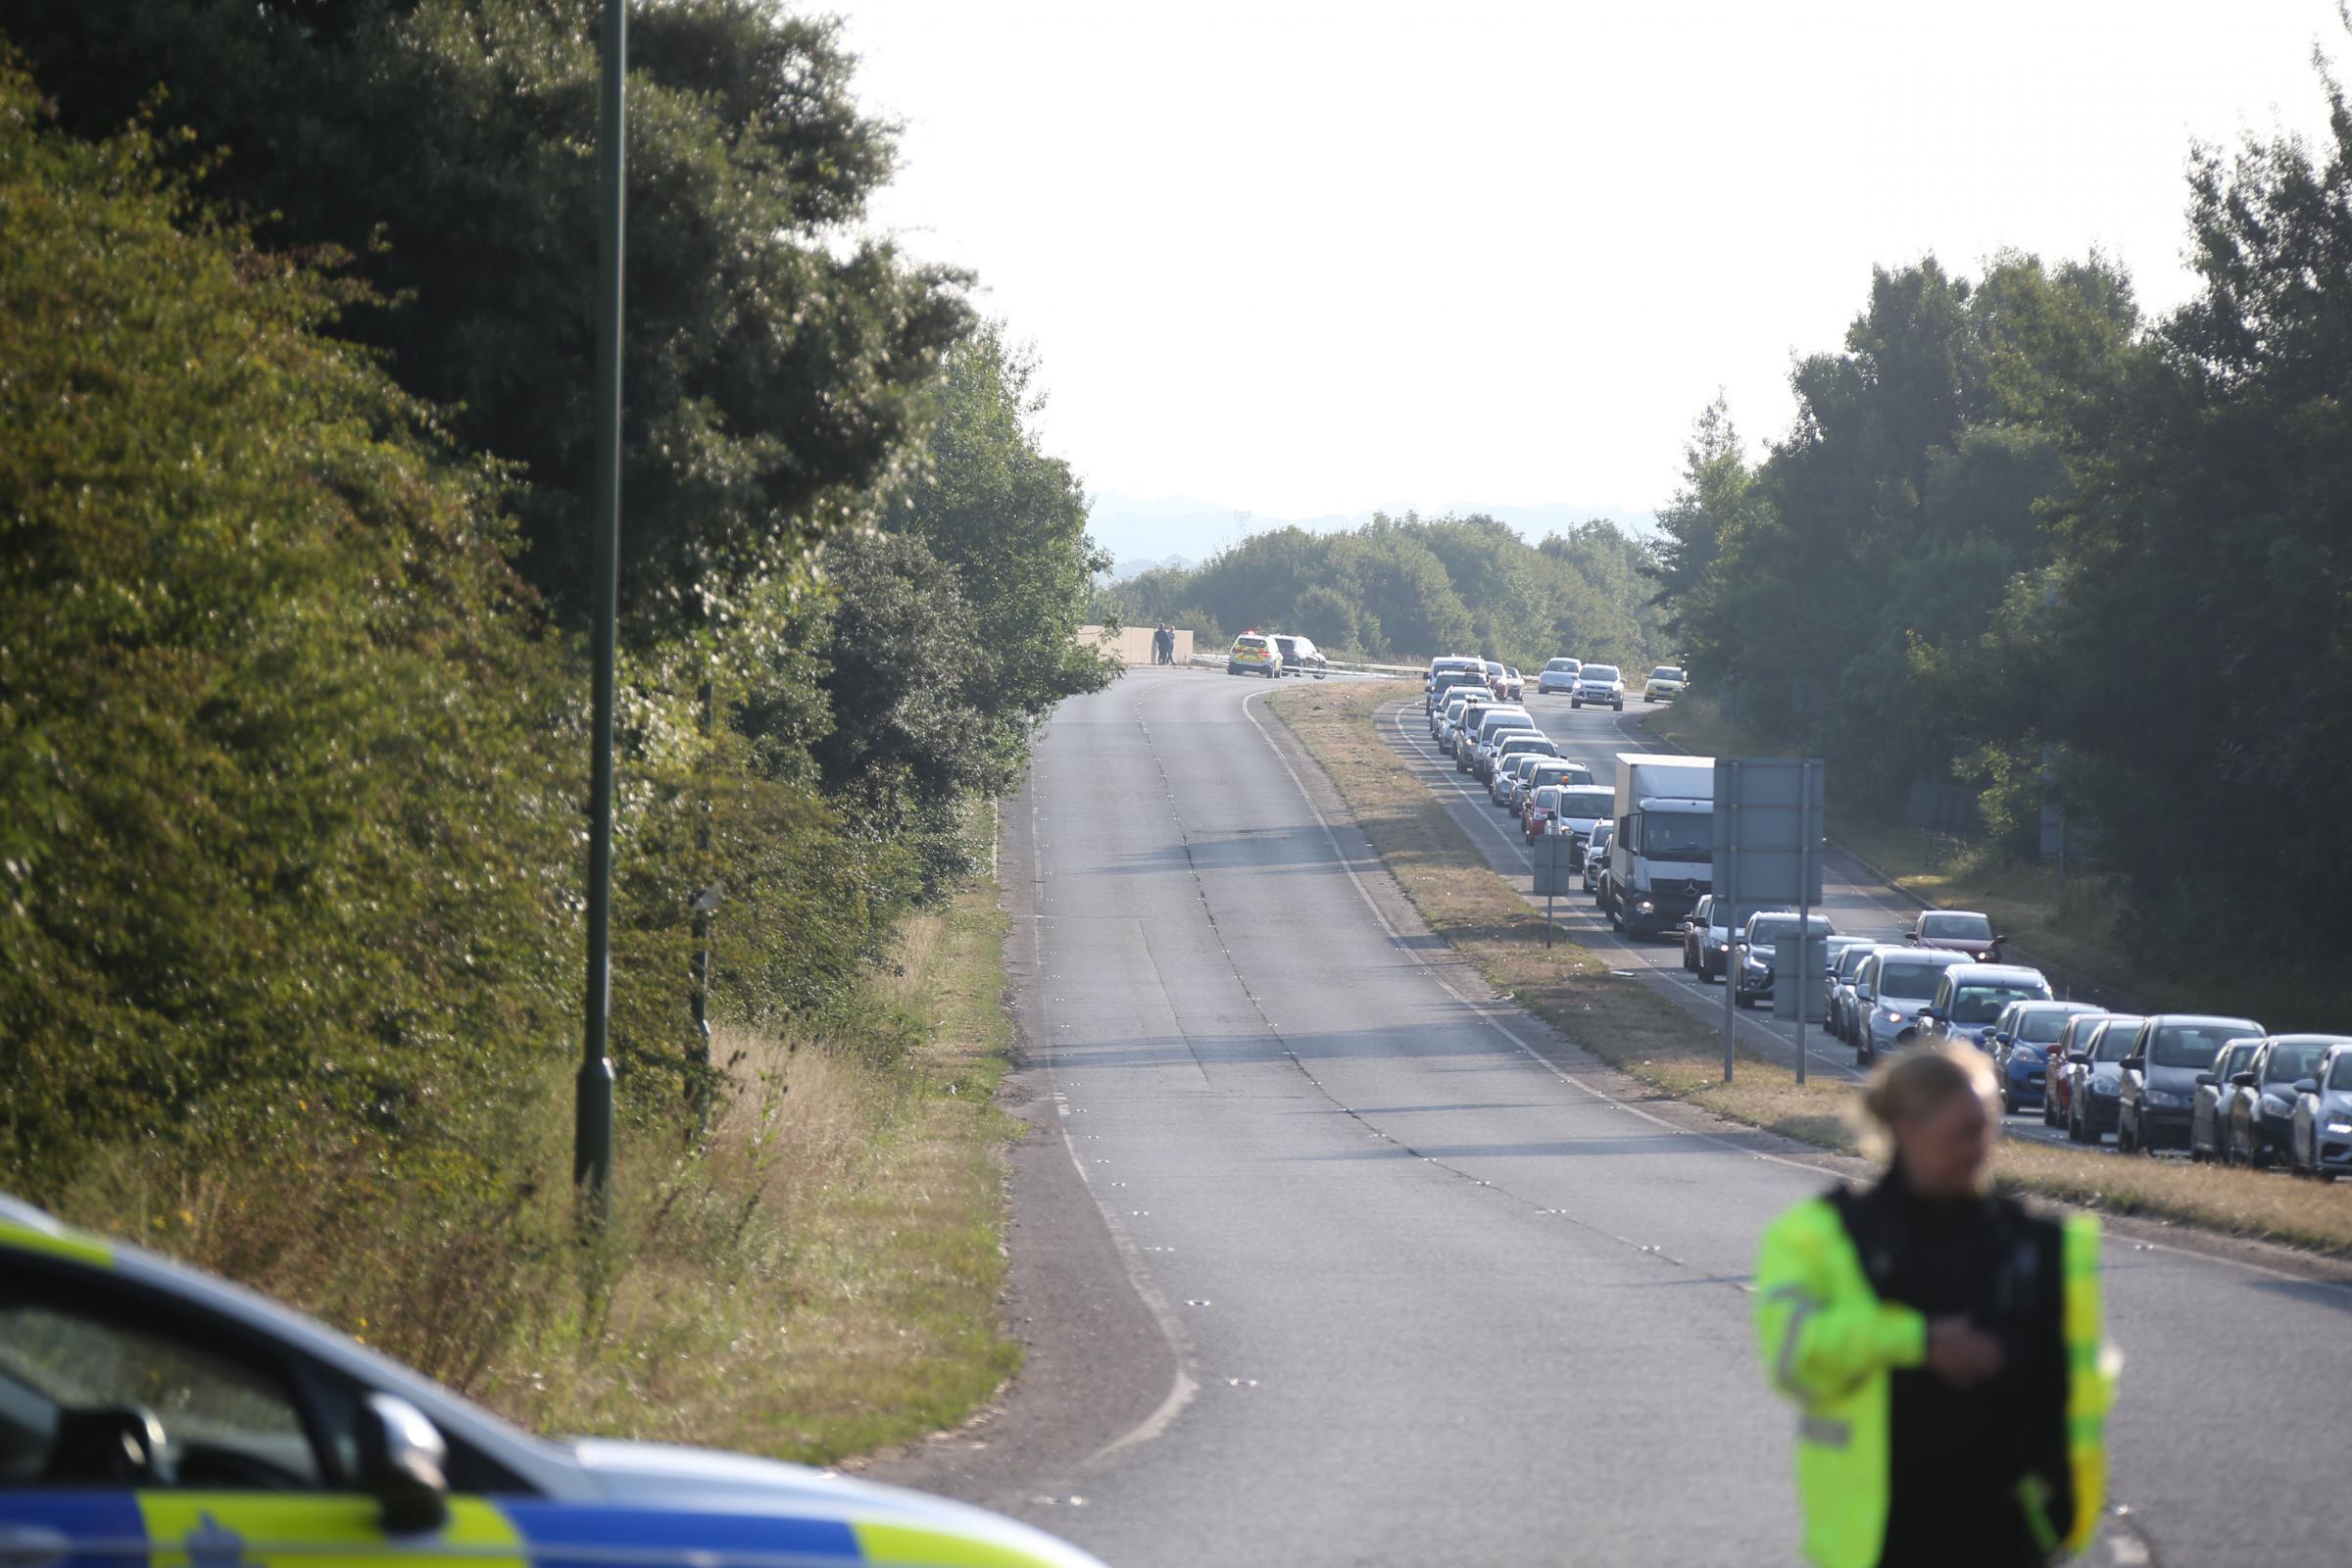 James MacKie is accused of causing death by either dangerous or careless driving after cyclist Simon Jones, 48, died on the A259 Worthing Road, Wick